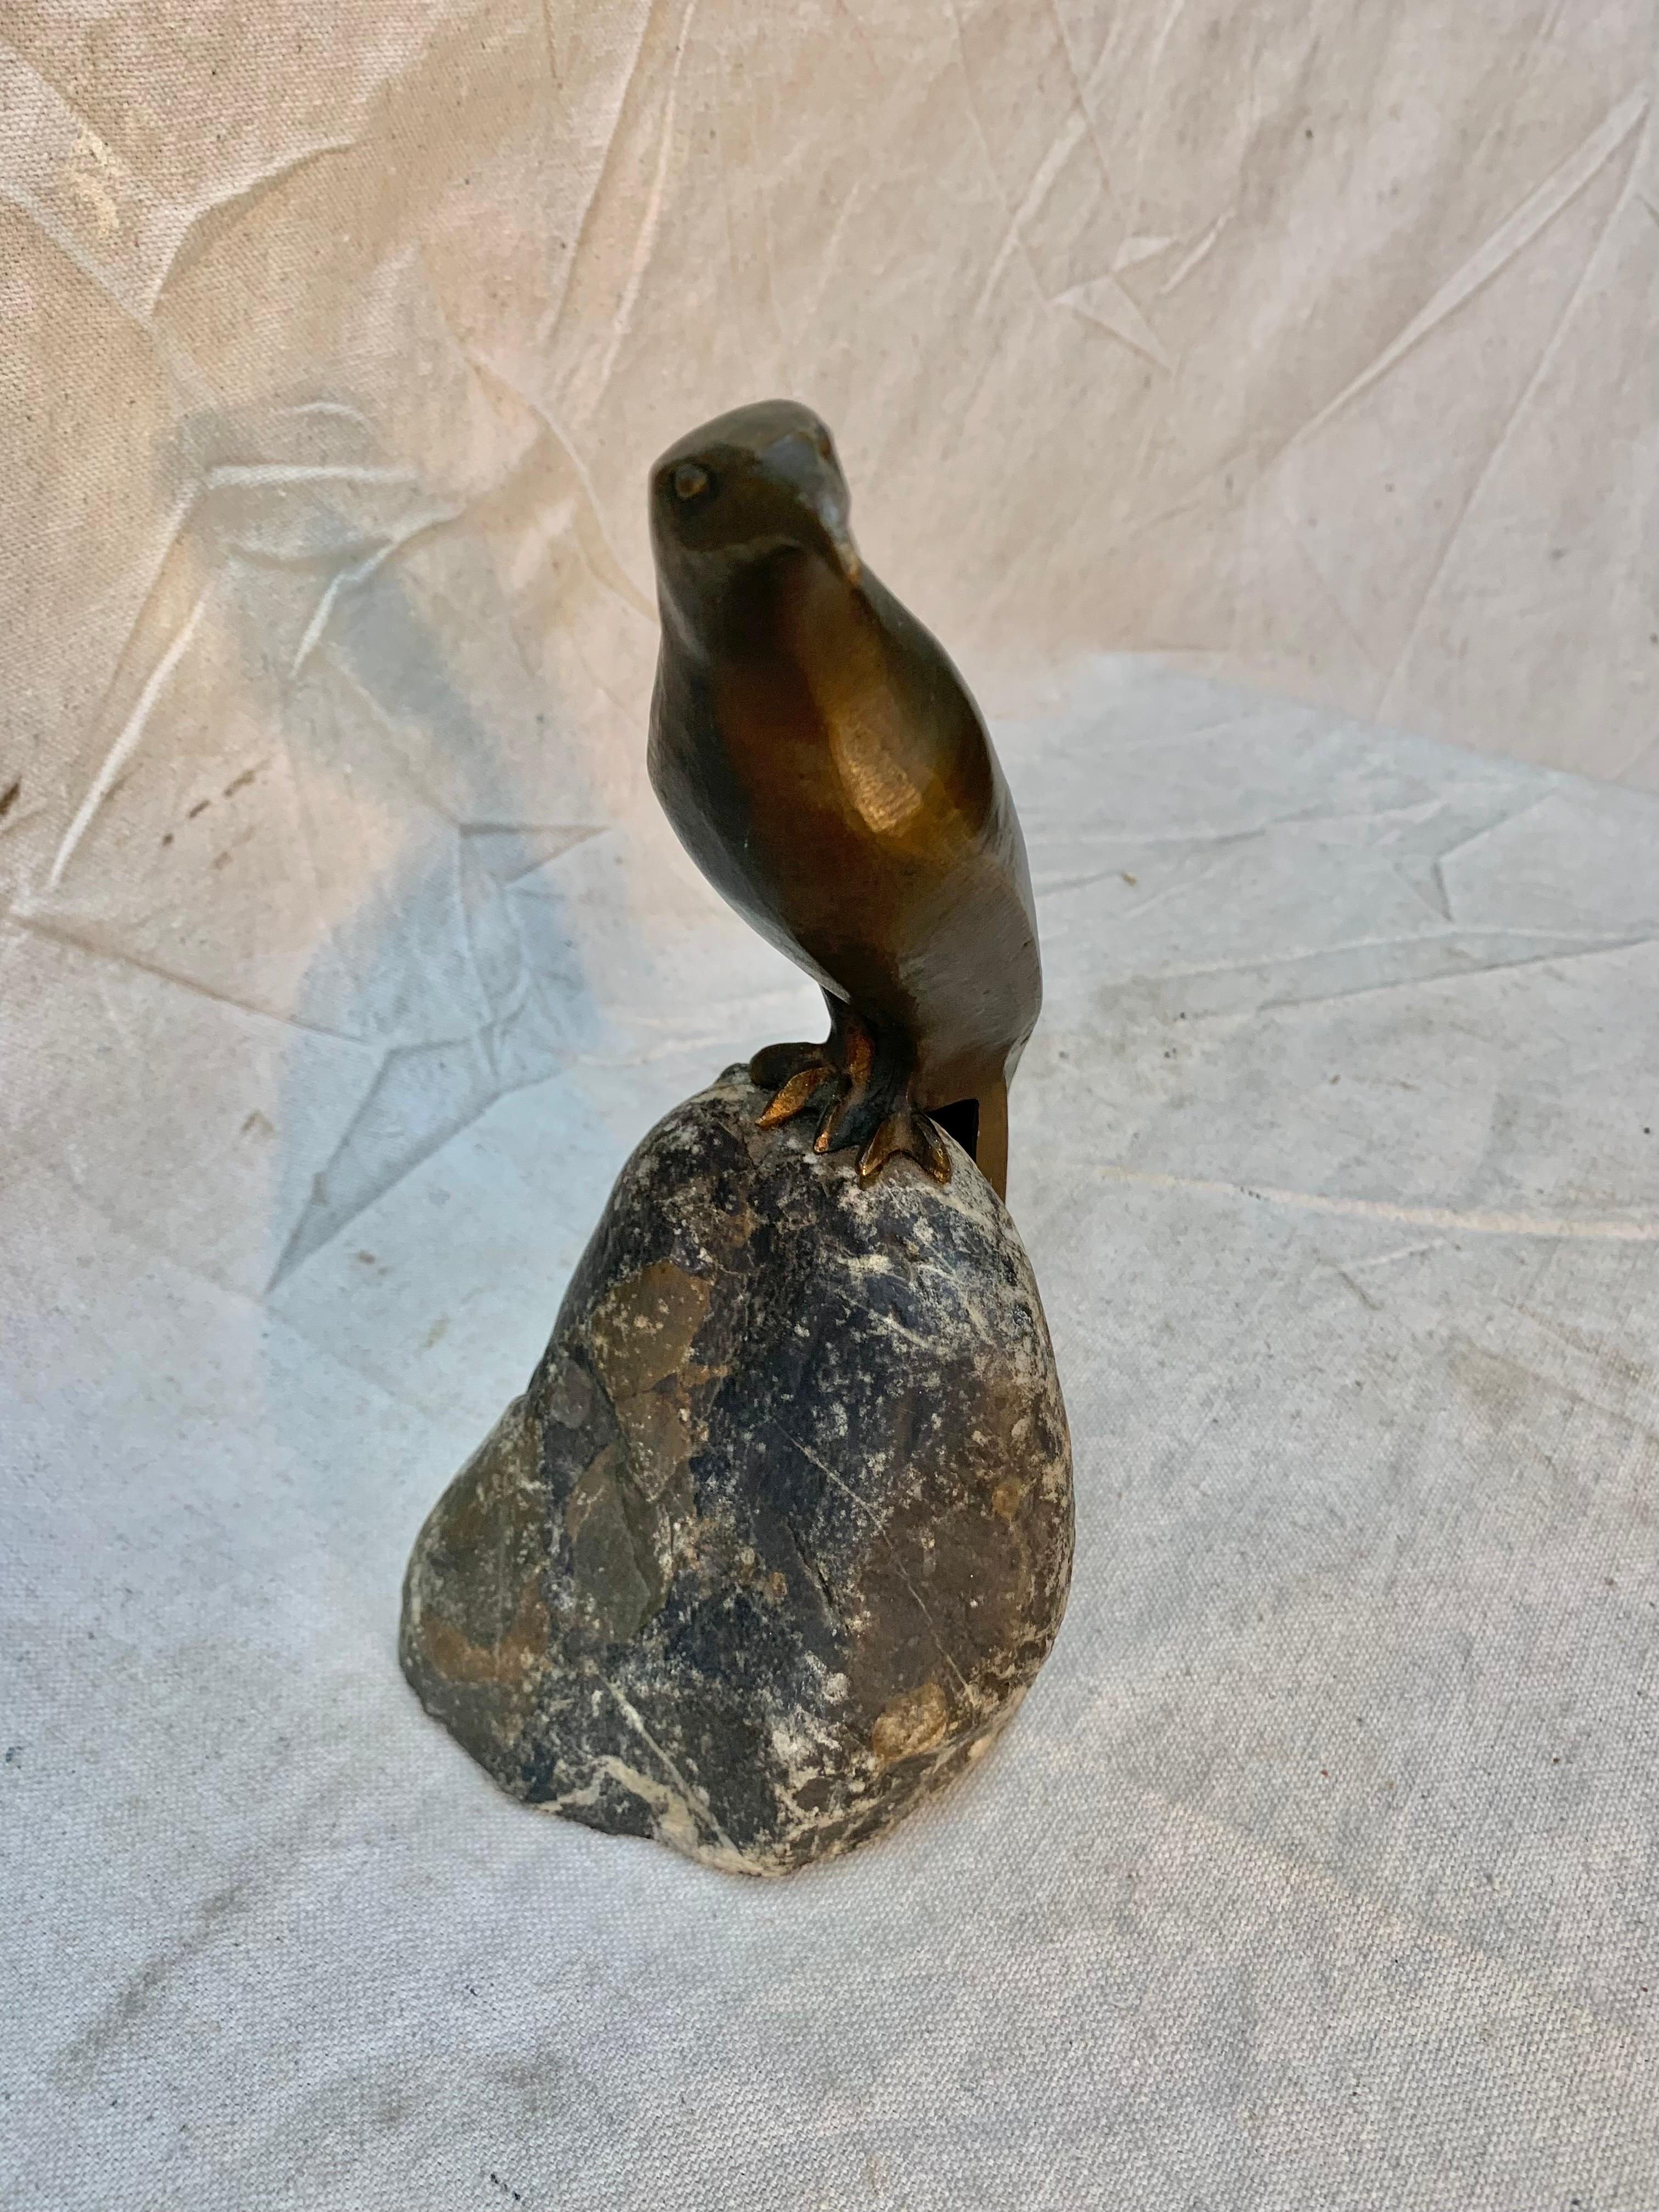 This sculpted antique bronze Art Deco style falcon is seated on natural granite by French artist Charles Reussner (1886 - 1961). The dark shades of the natural granite contrast beautifully with the rich, warm patina of the bronze. The sculpture is